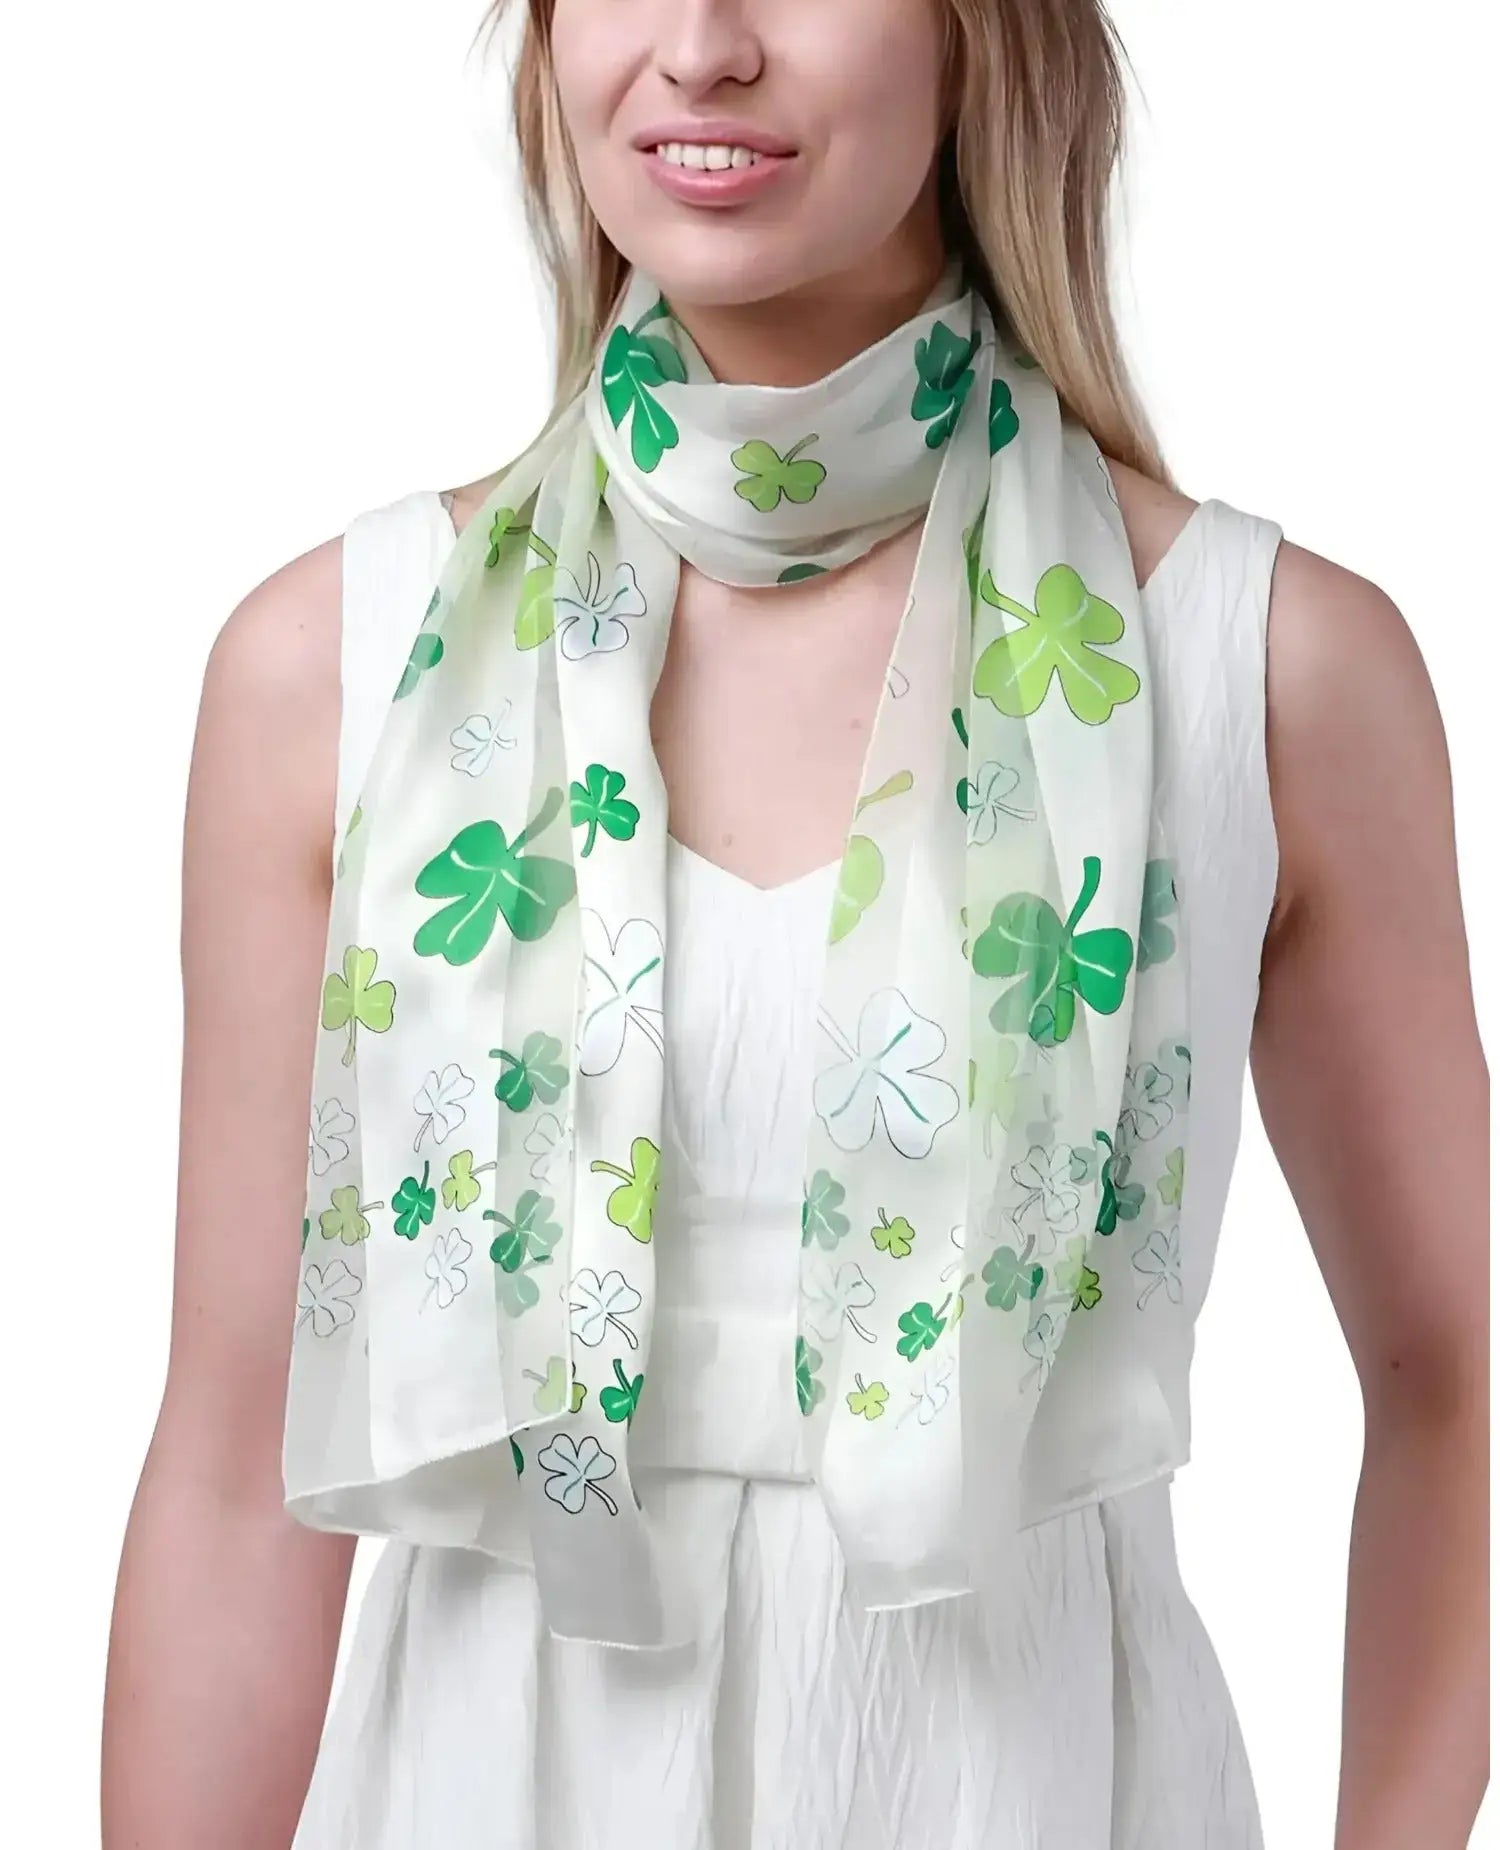 Woman wearing white dress and green scarf - Multi Shamrock Satin Scarf for St. Patrick’s Day